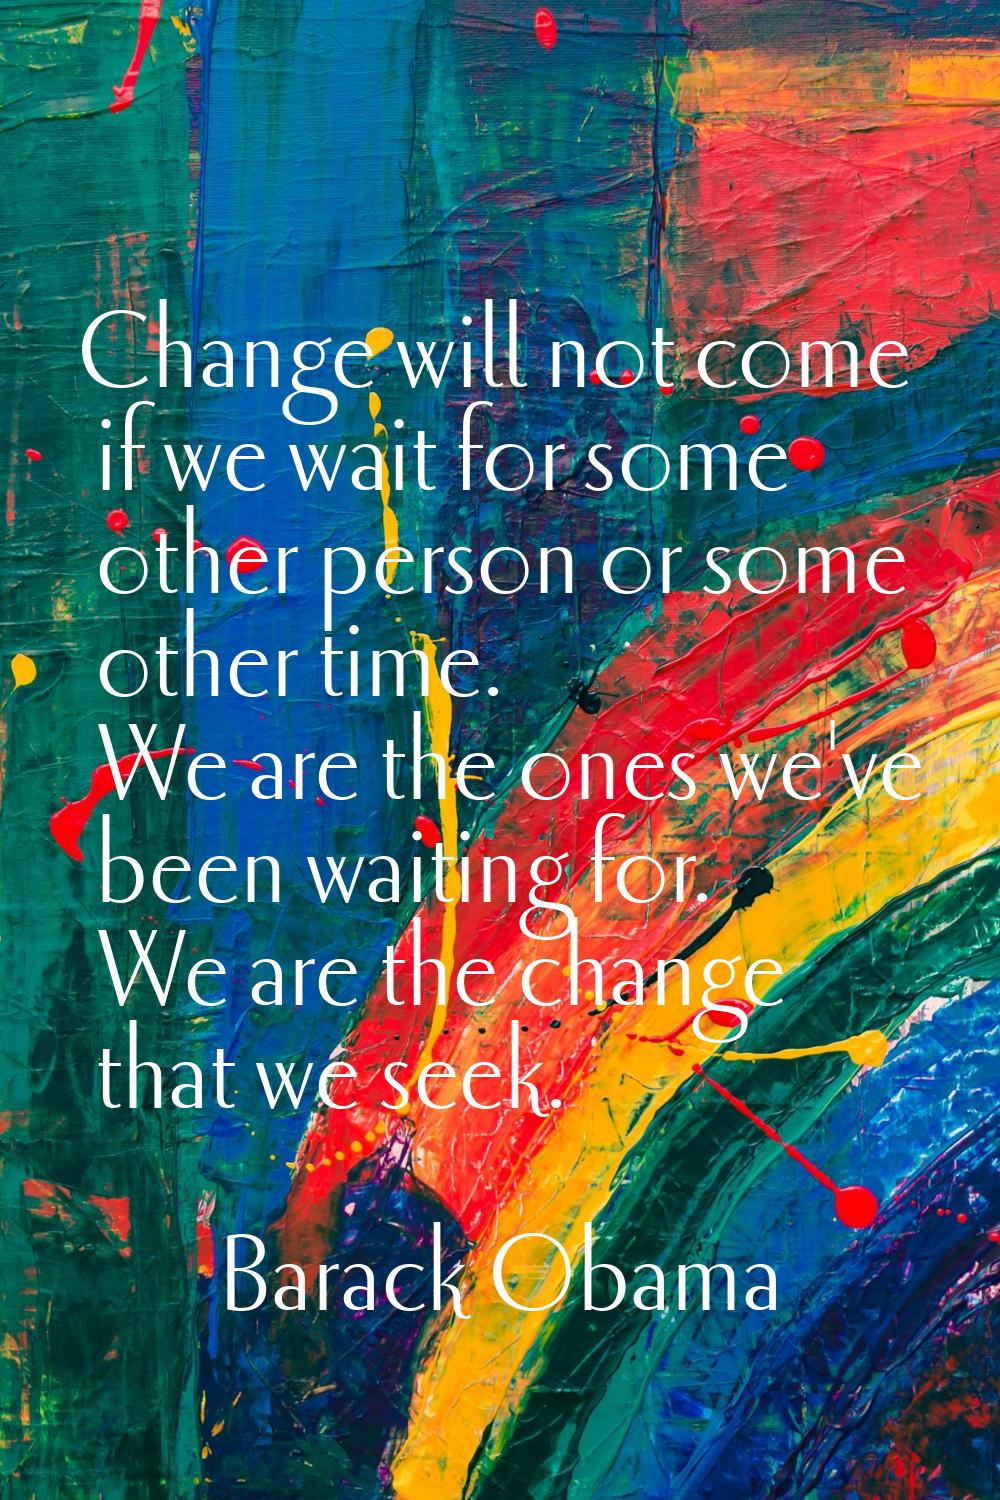 Change will not come if we wait for some other person or some other time. We are the ones we've bee